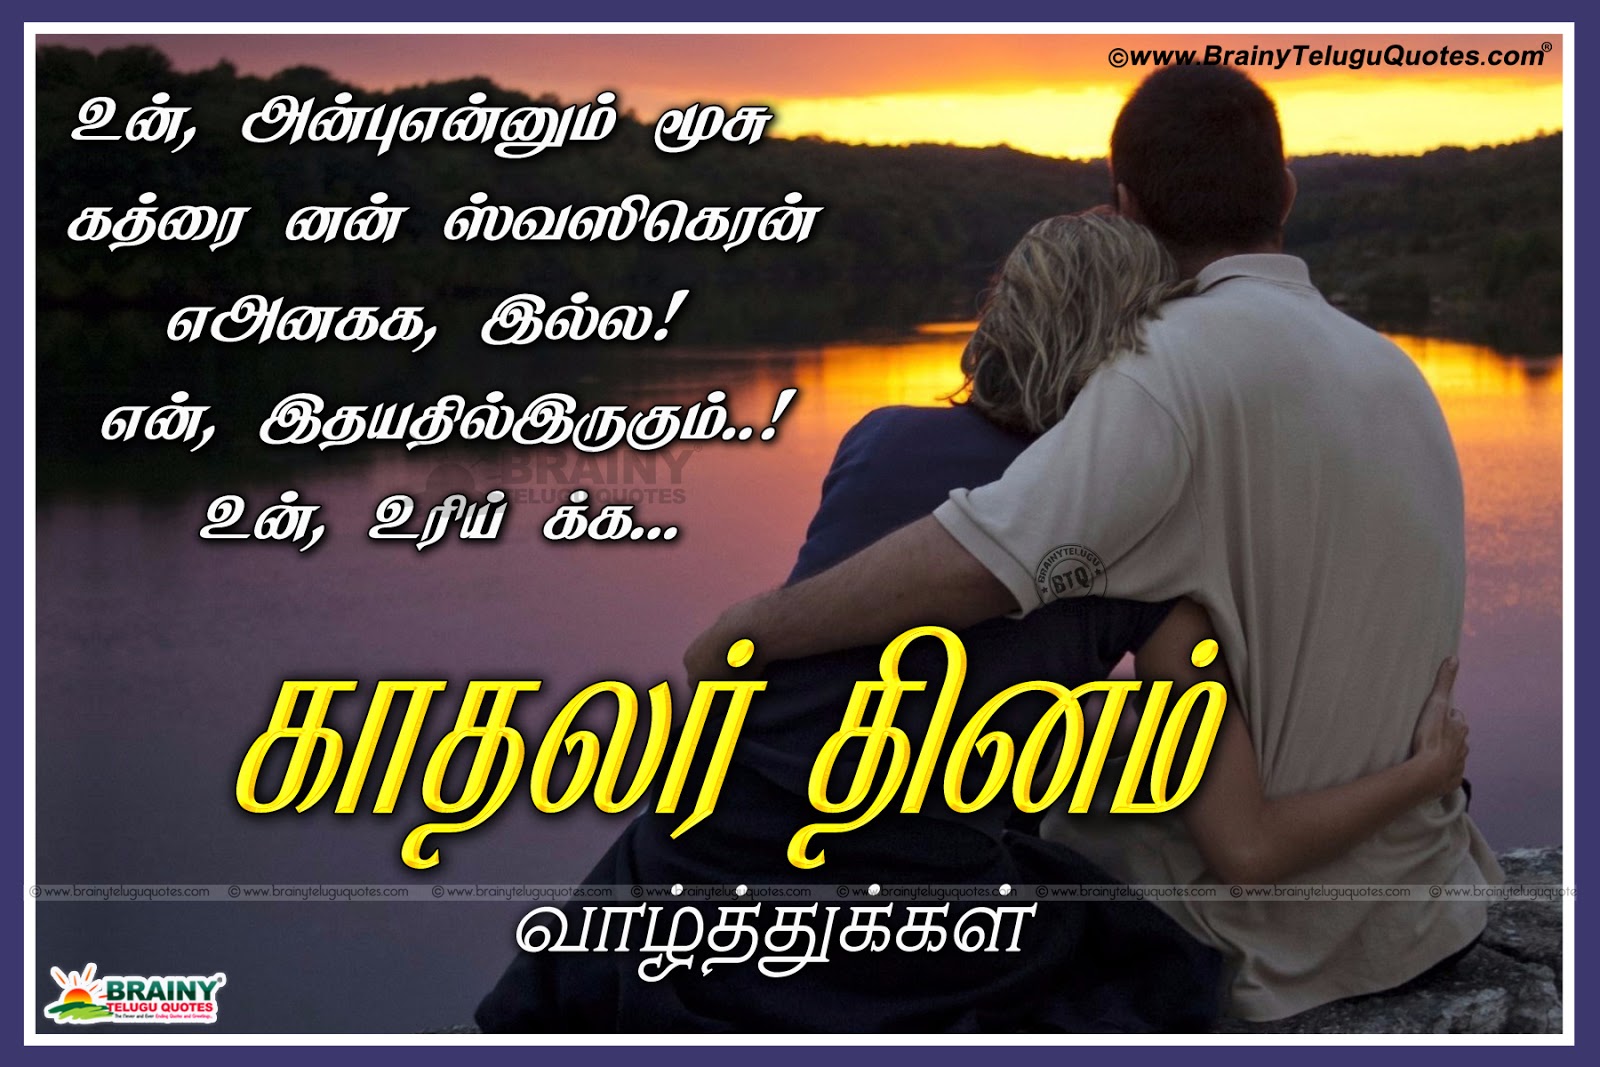 Tamil Lovers Day / Valentines Day Tamil Poems Quotations KavithaiTamil